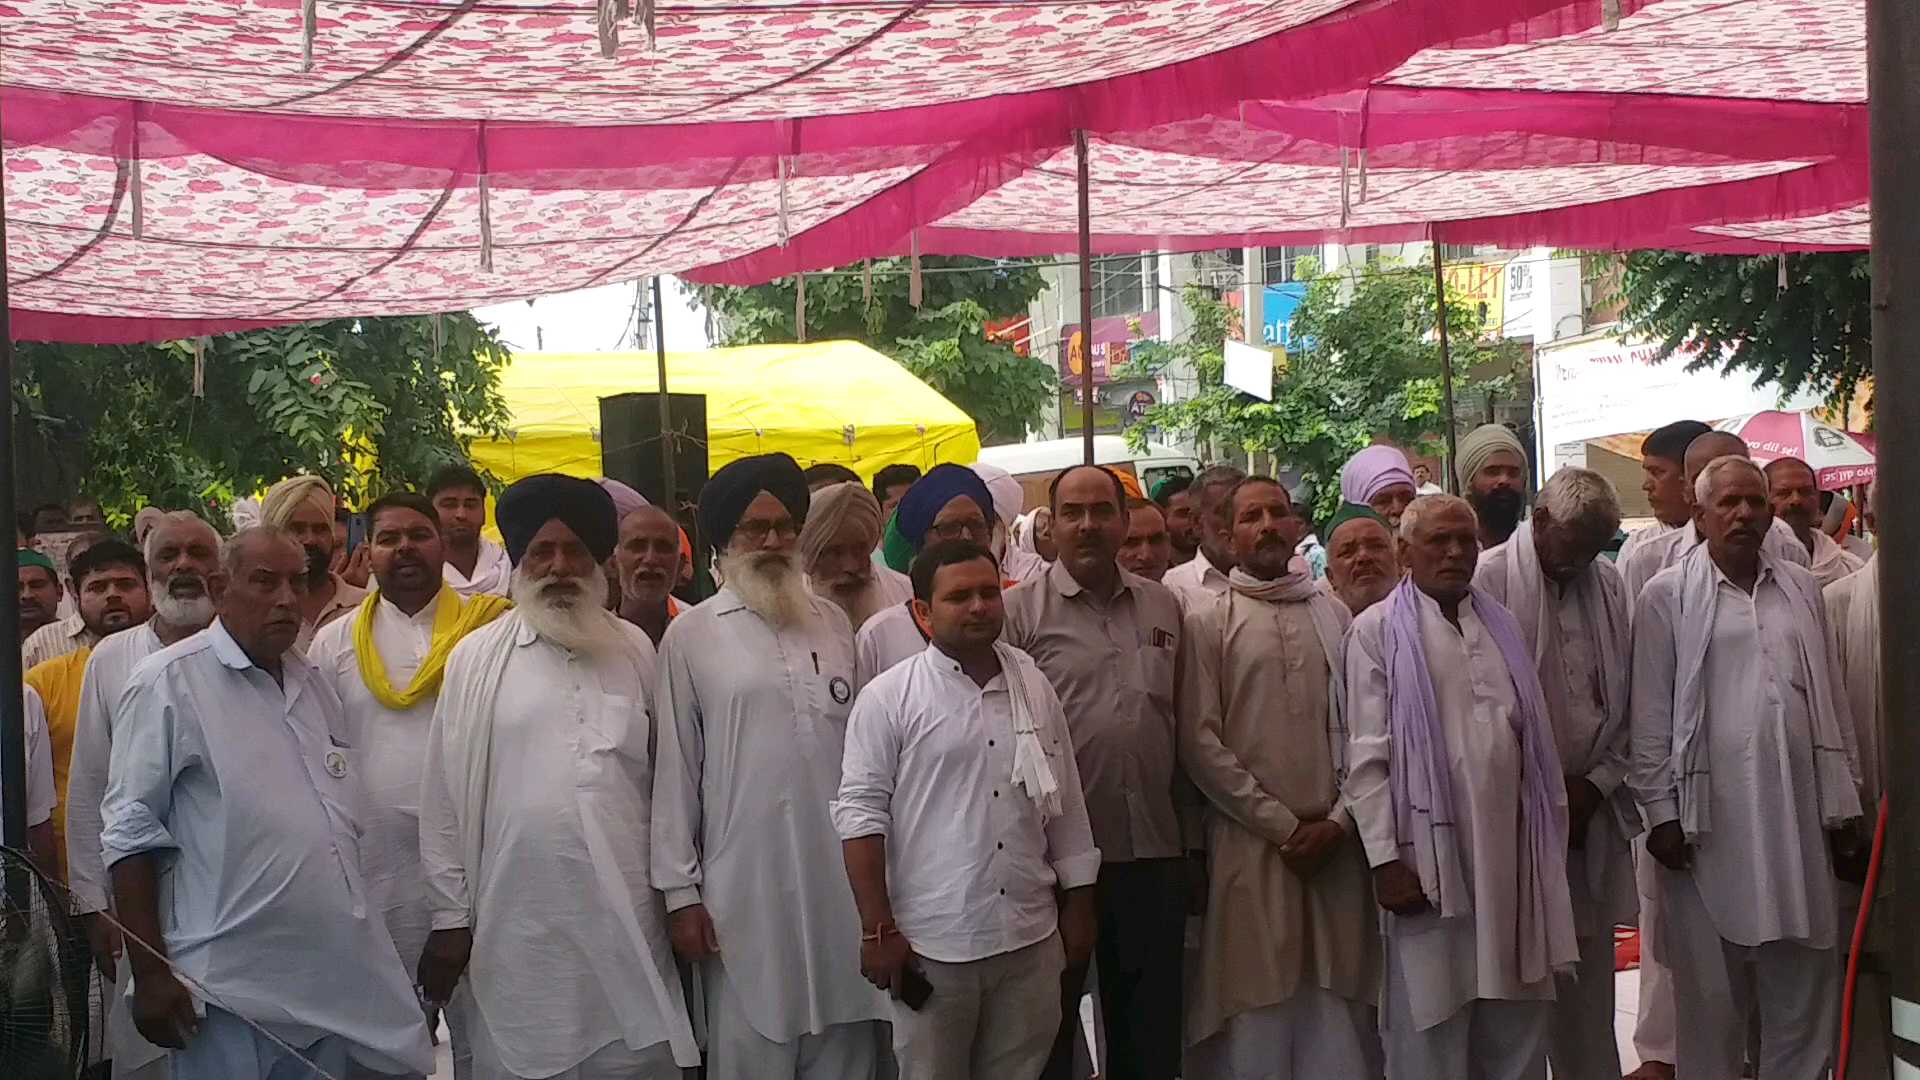 Farmers strike in Karnal continues for the fourth day, tomorrow Kisan Morcha will have an important meeting